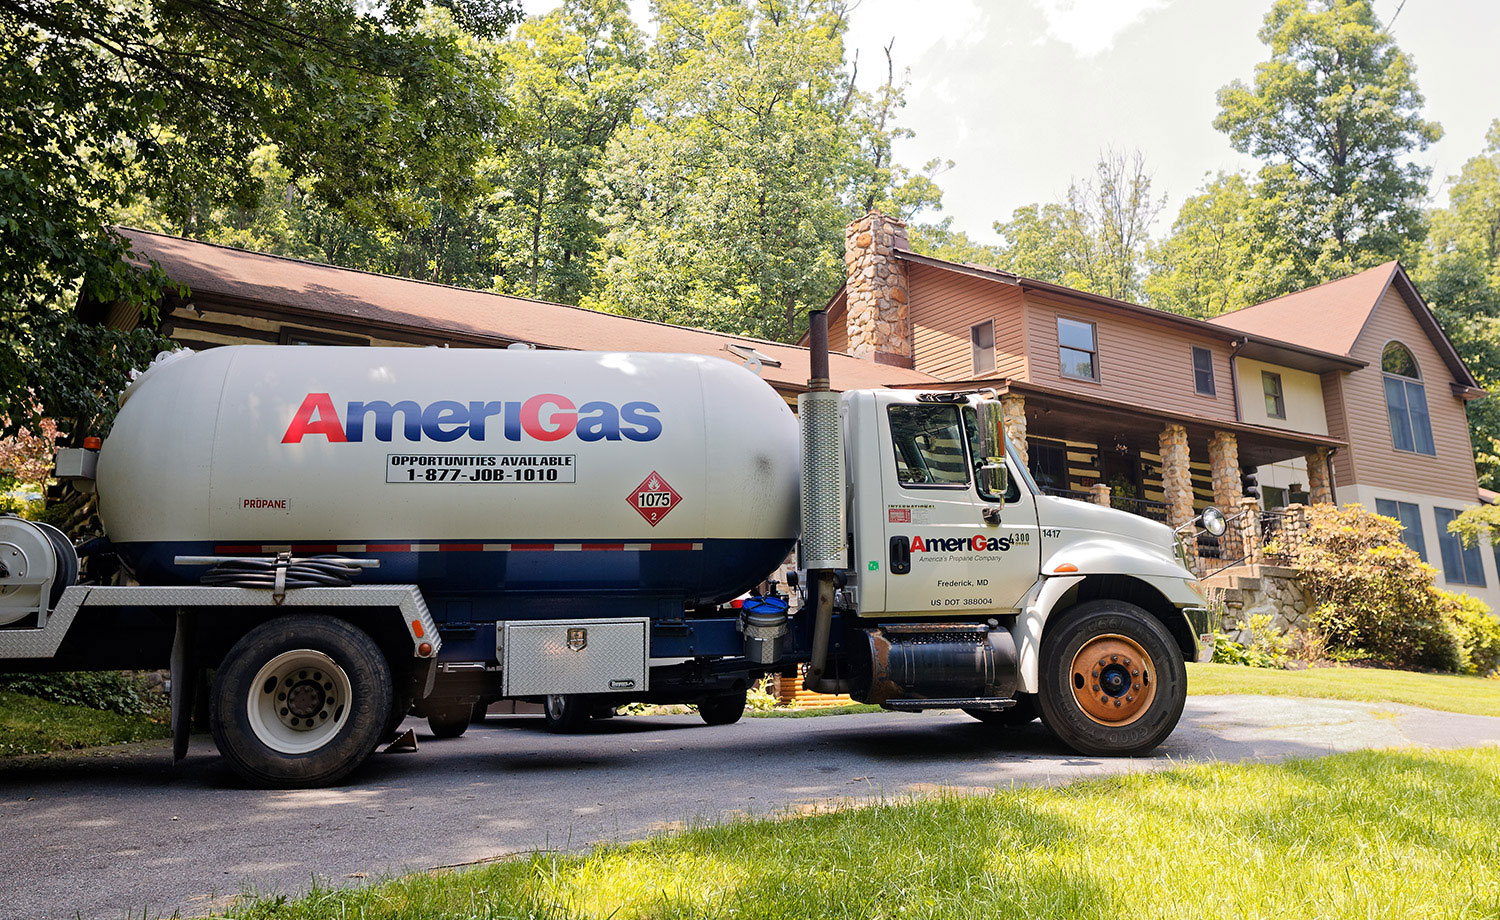 AmeriGas Tanker truck in front of a house.